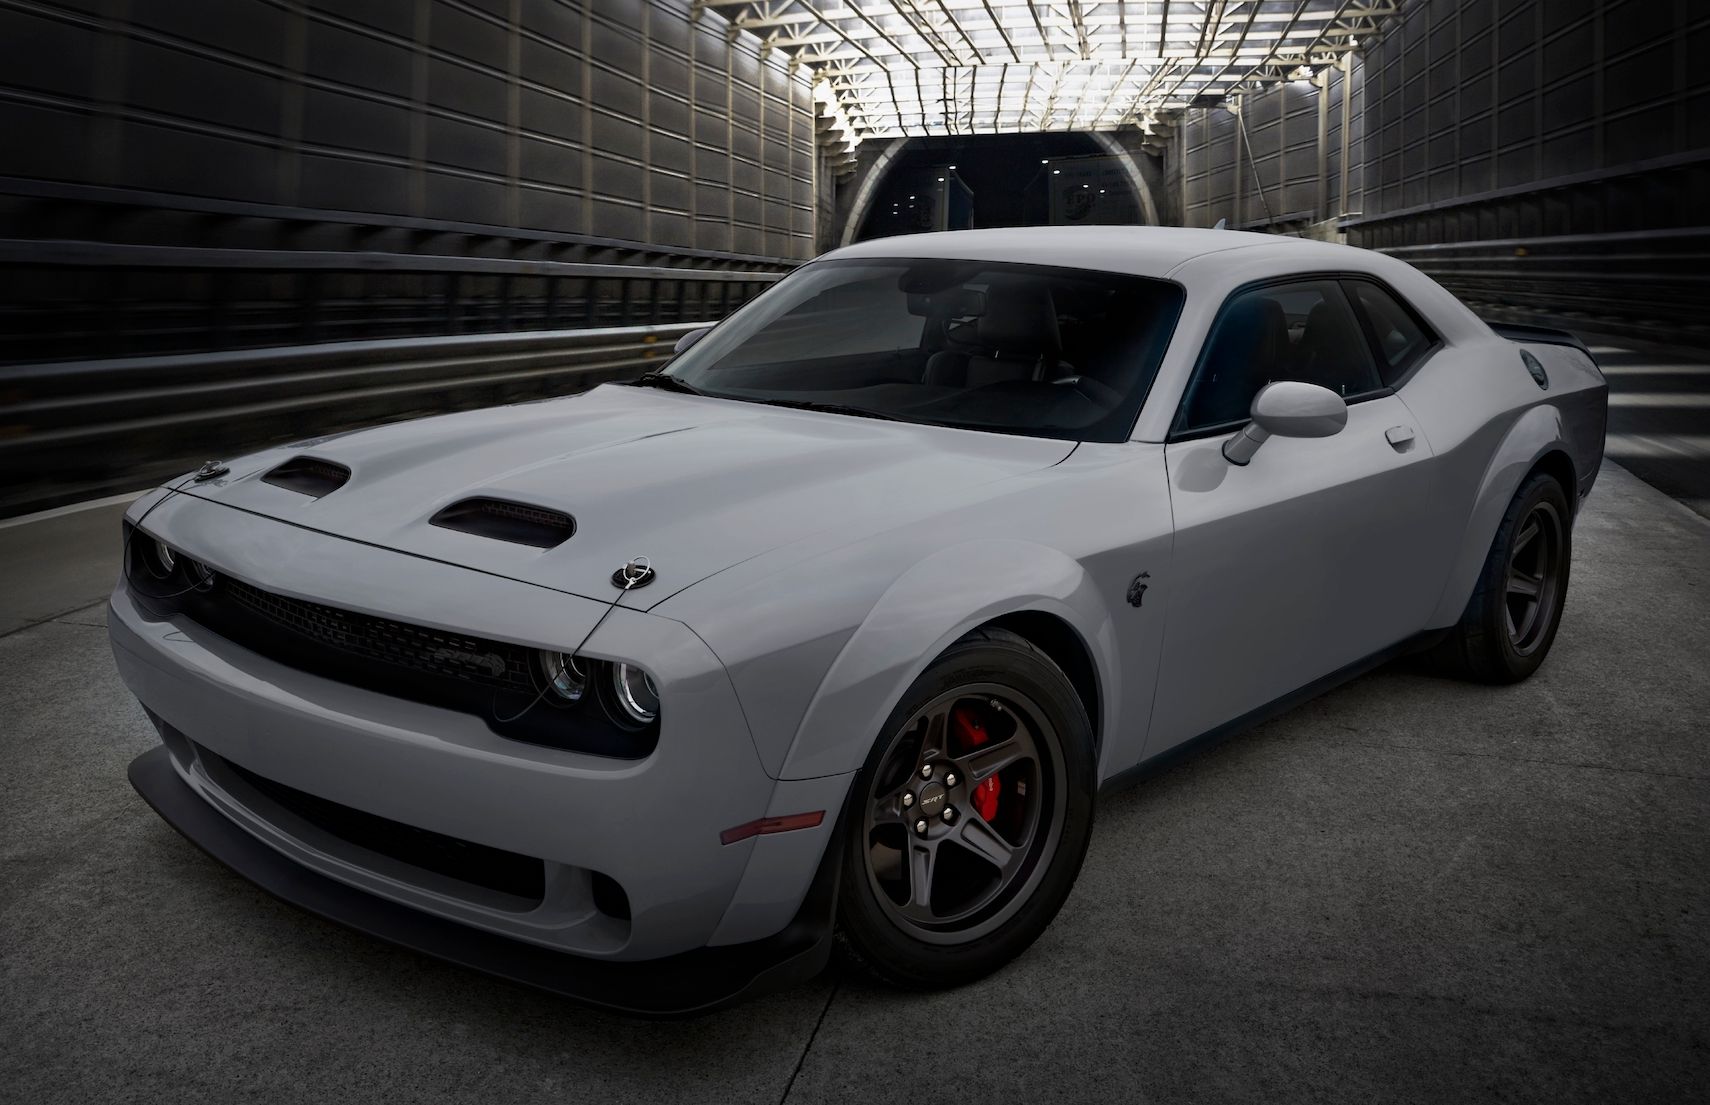 White Challenger muscle car